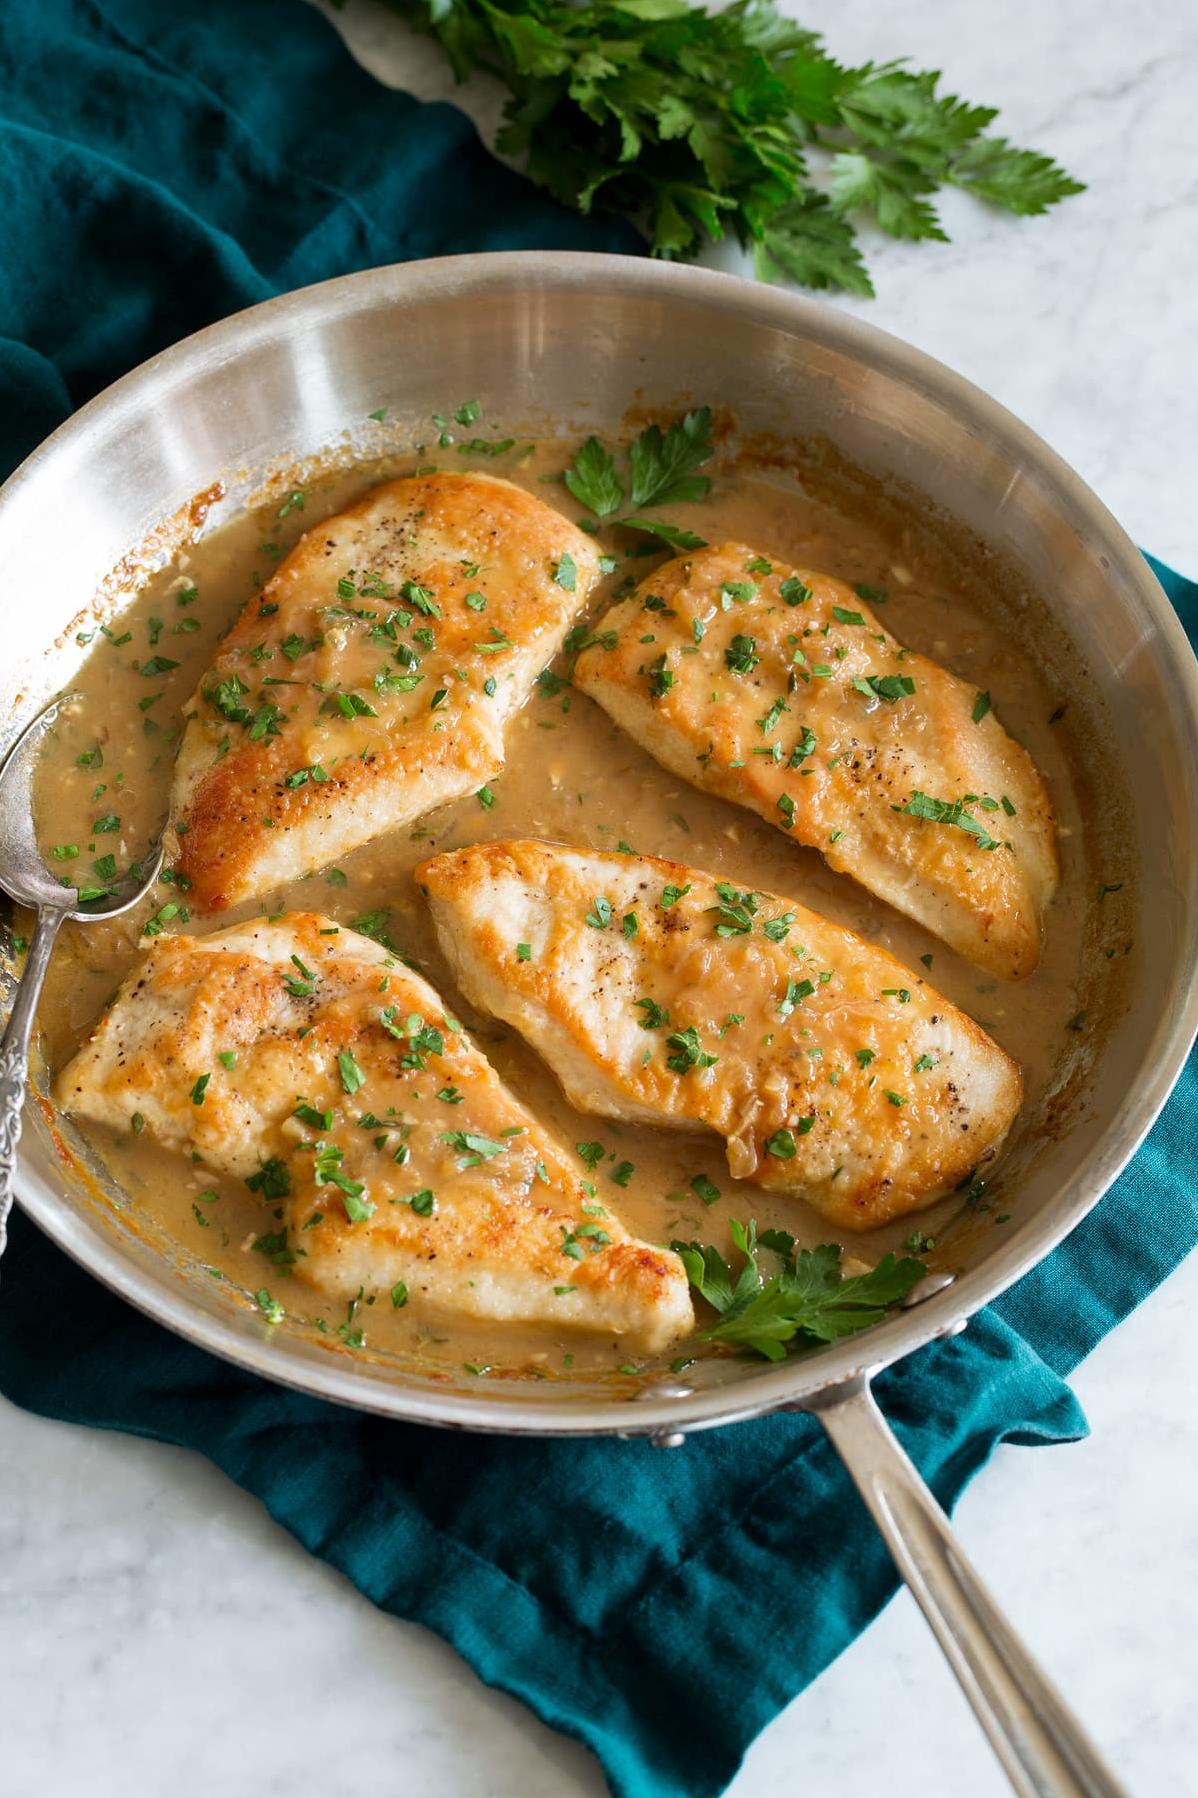  The tender chicken is marinated in a flavorful blend of wine, herbs, and spices before being cooked to perfection.